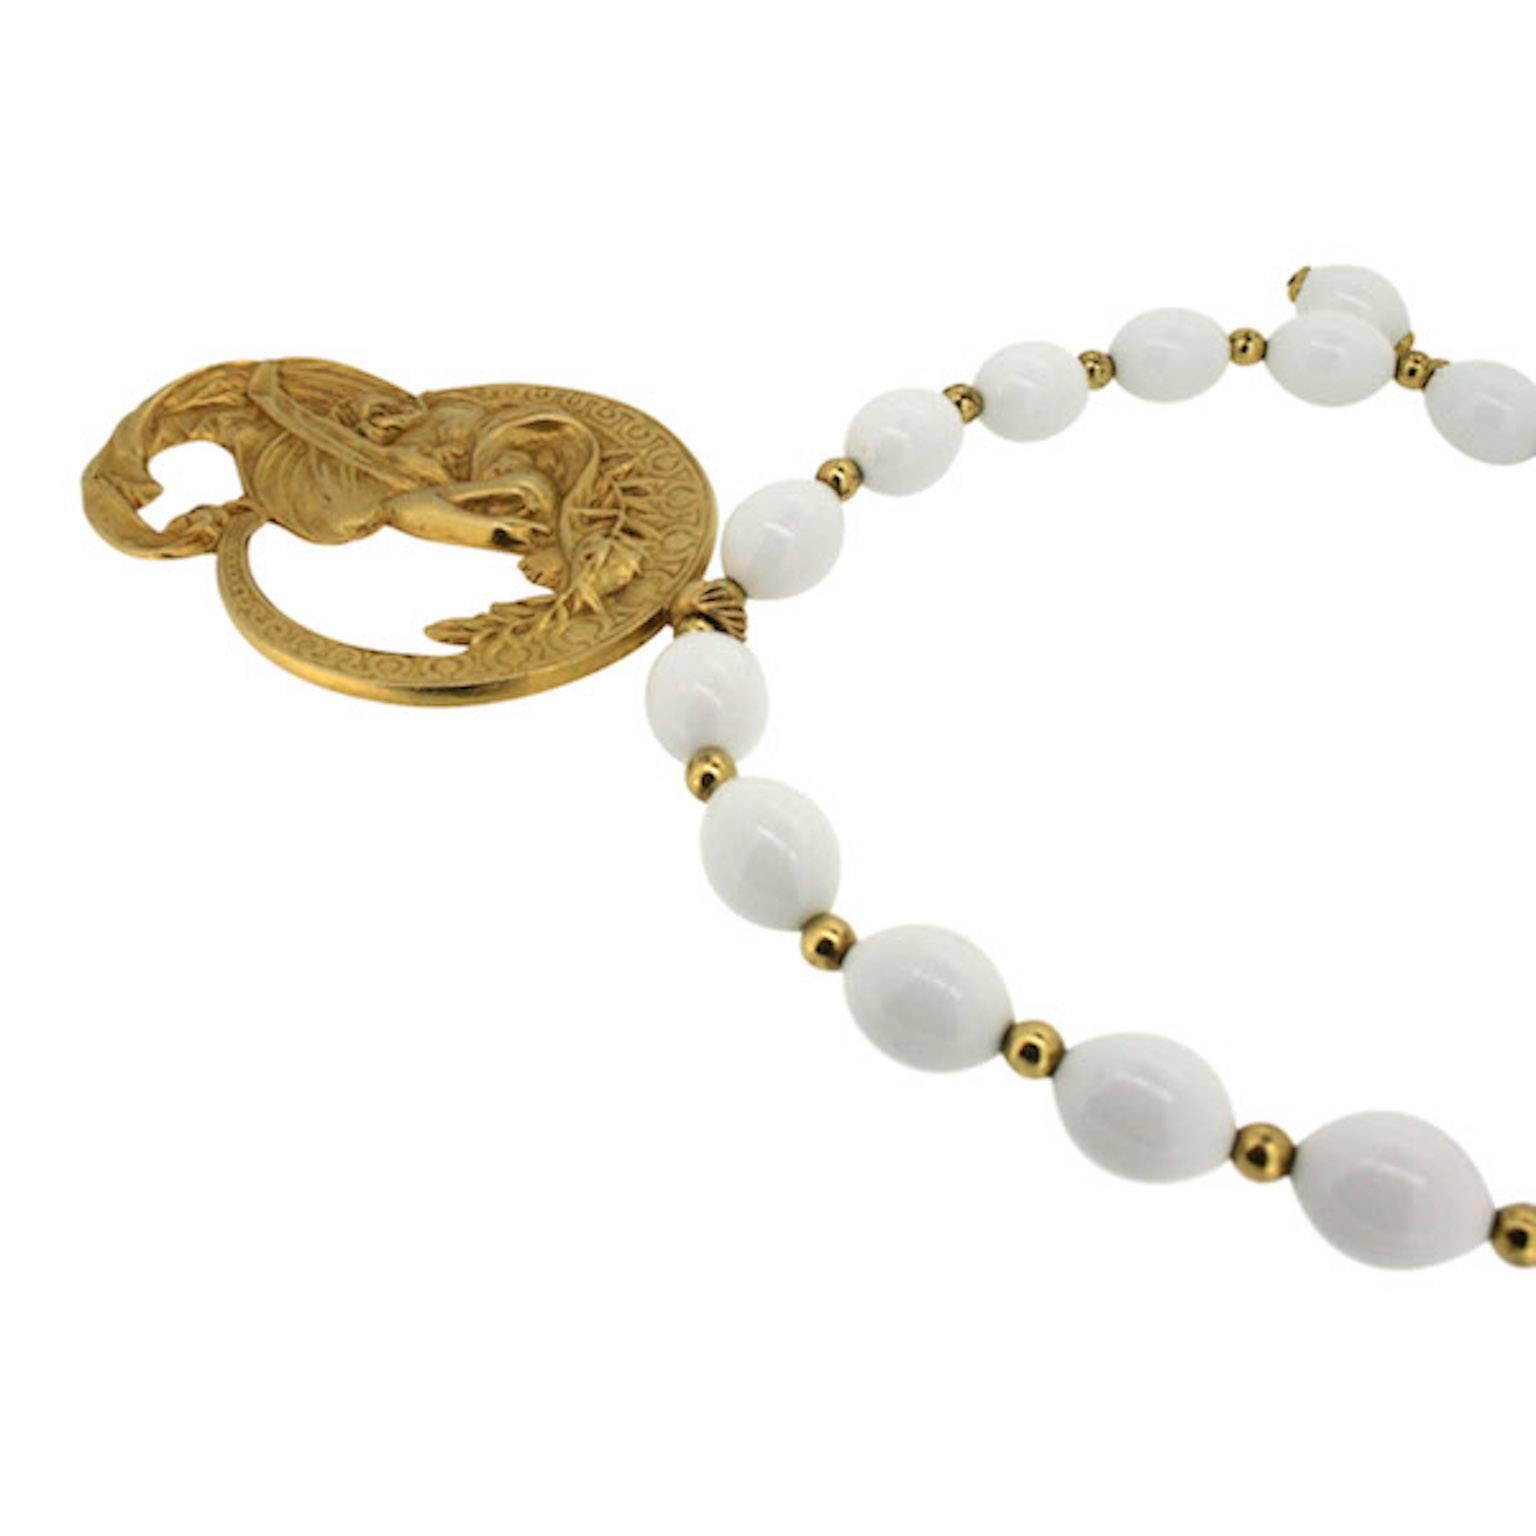 This beautiful necklace featuring Art Nouveau styling was created by Kenneth Jay Lane. It dates from the 1980s.

Condition Report:
Excellent

The Details...
This necklace features large, oval white plastic beads interspersed with small, round gold